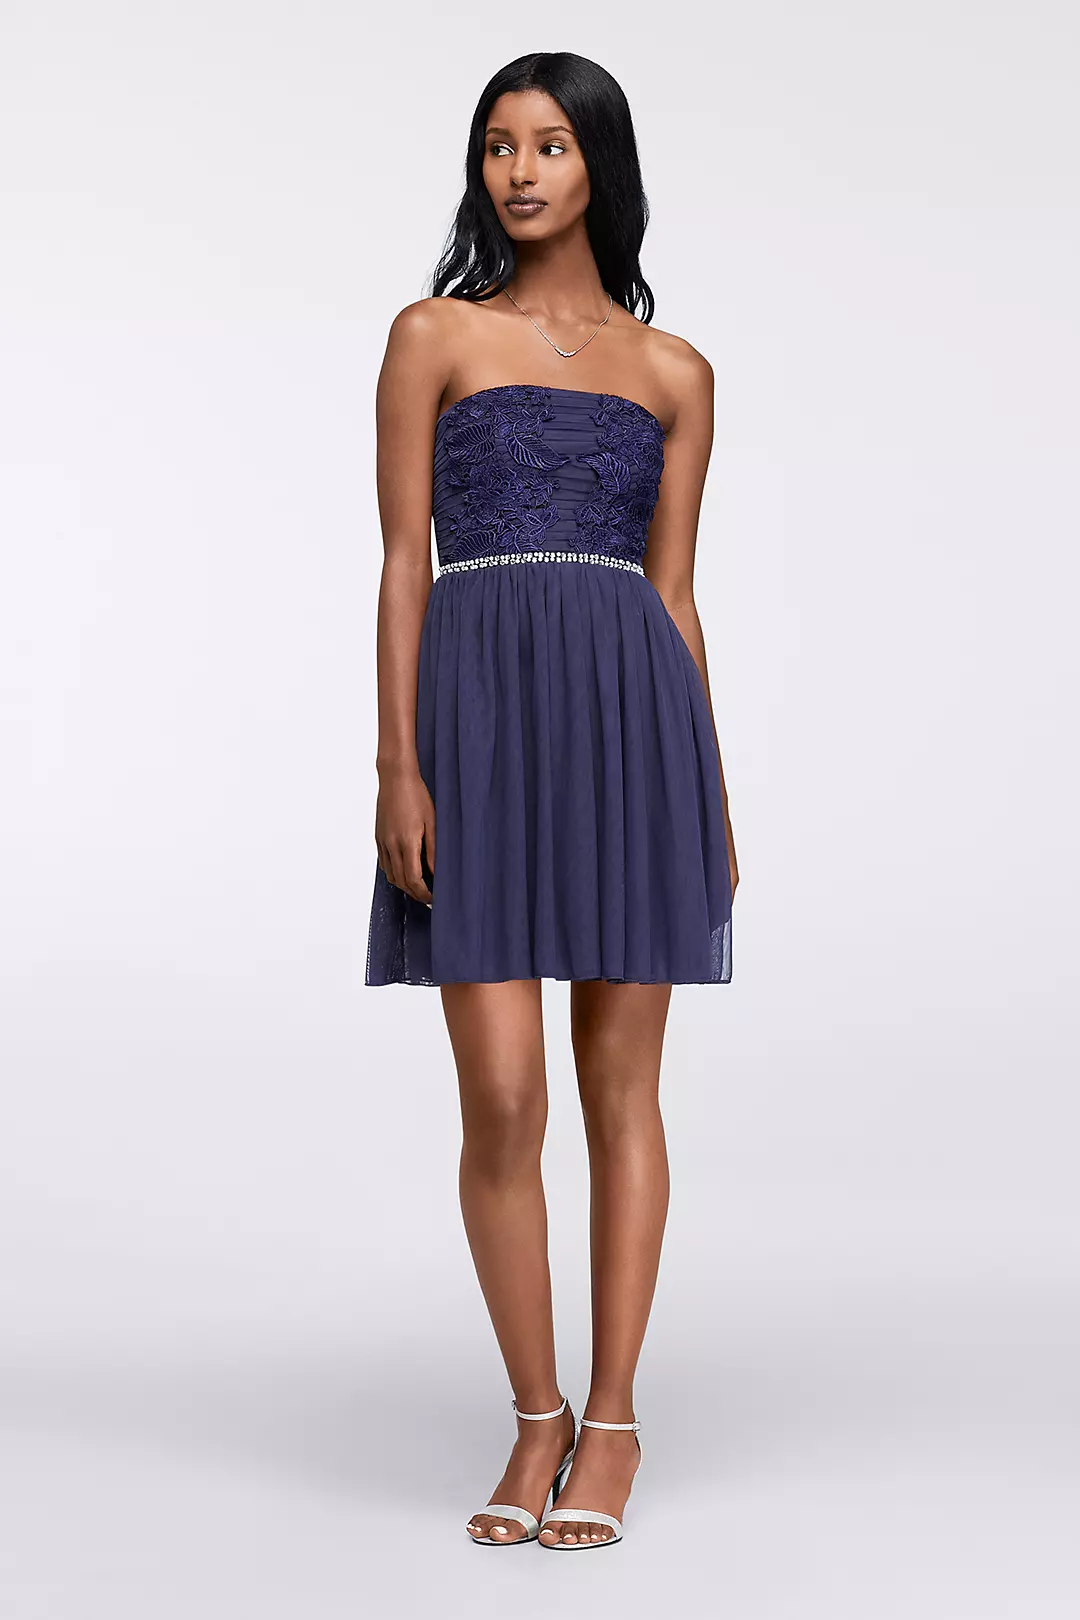 Lace Applique Short Strapless Homecoming Dress Image